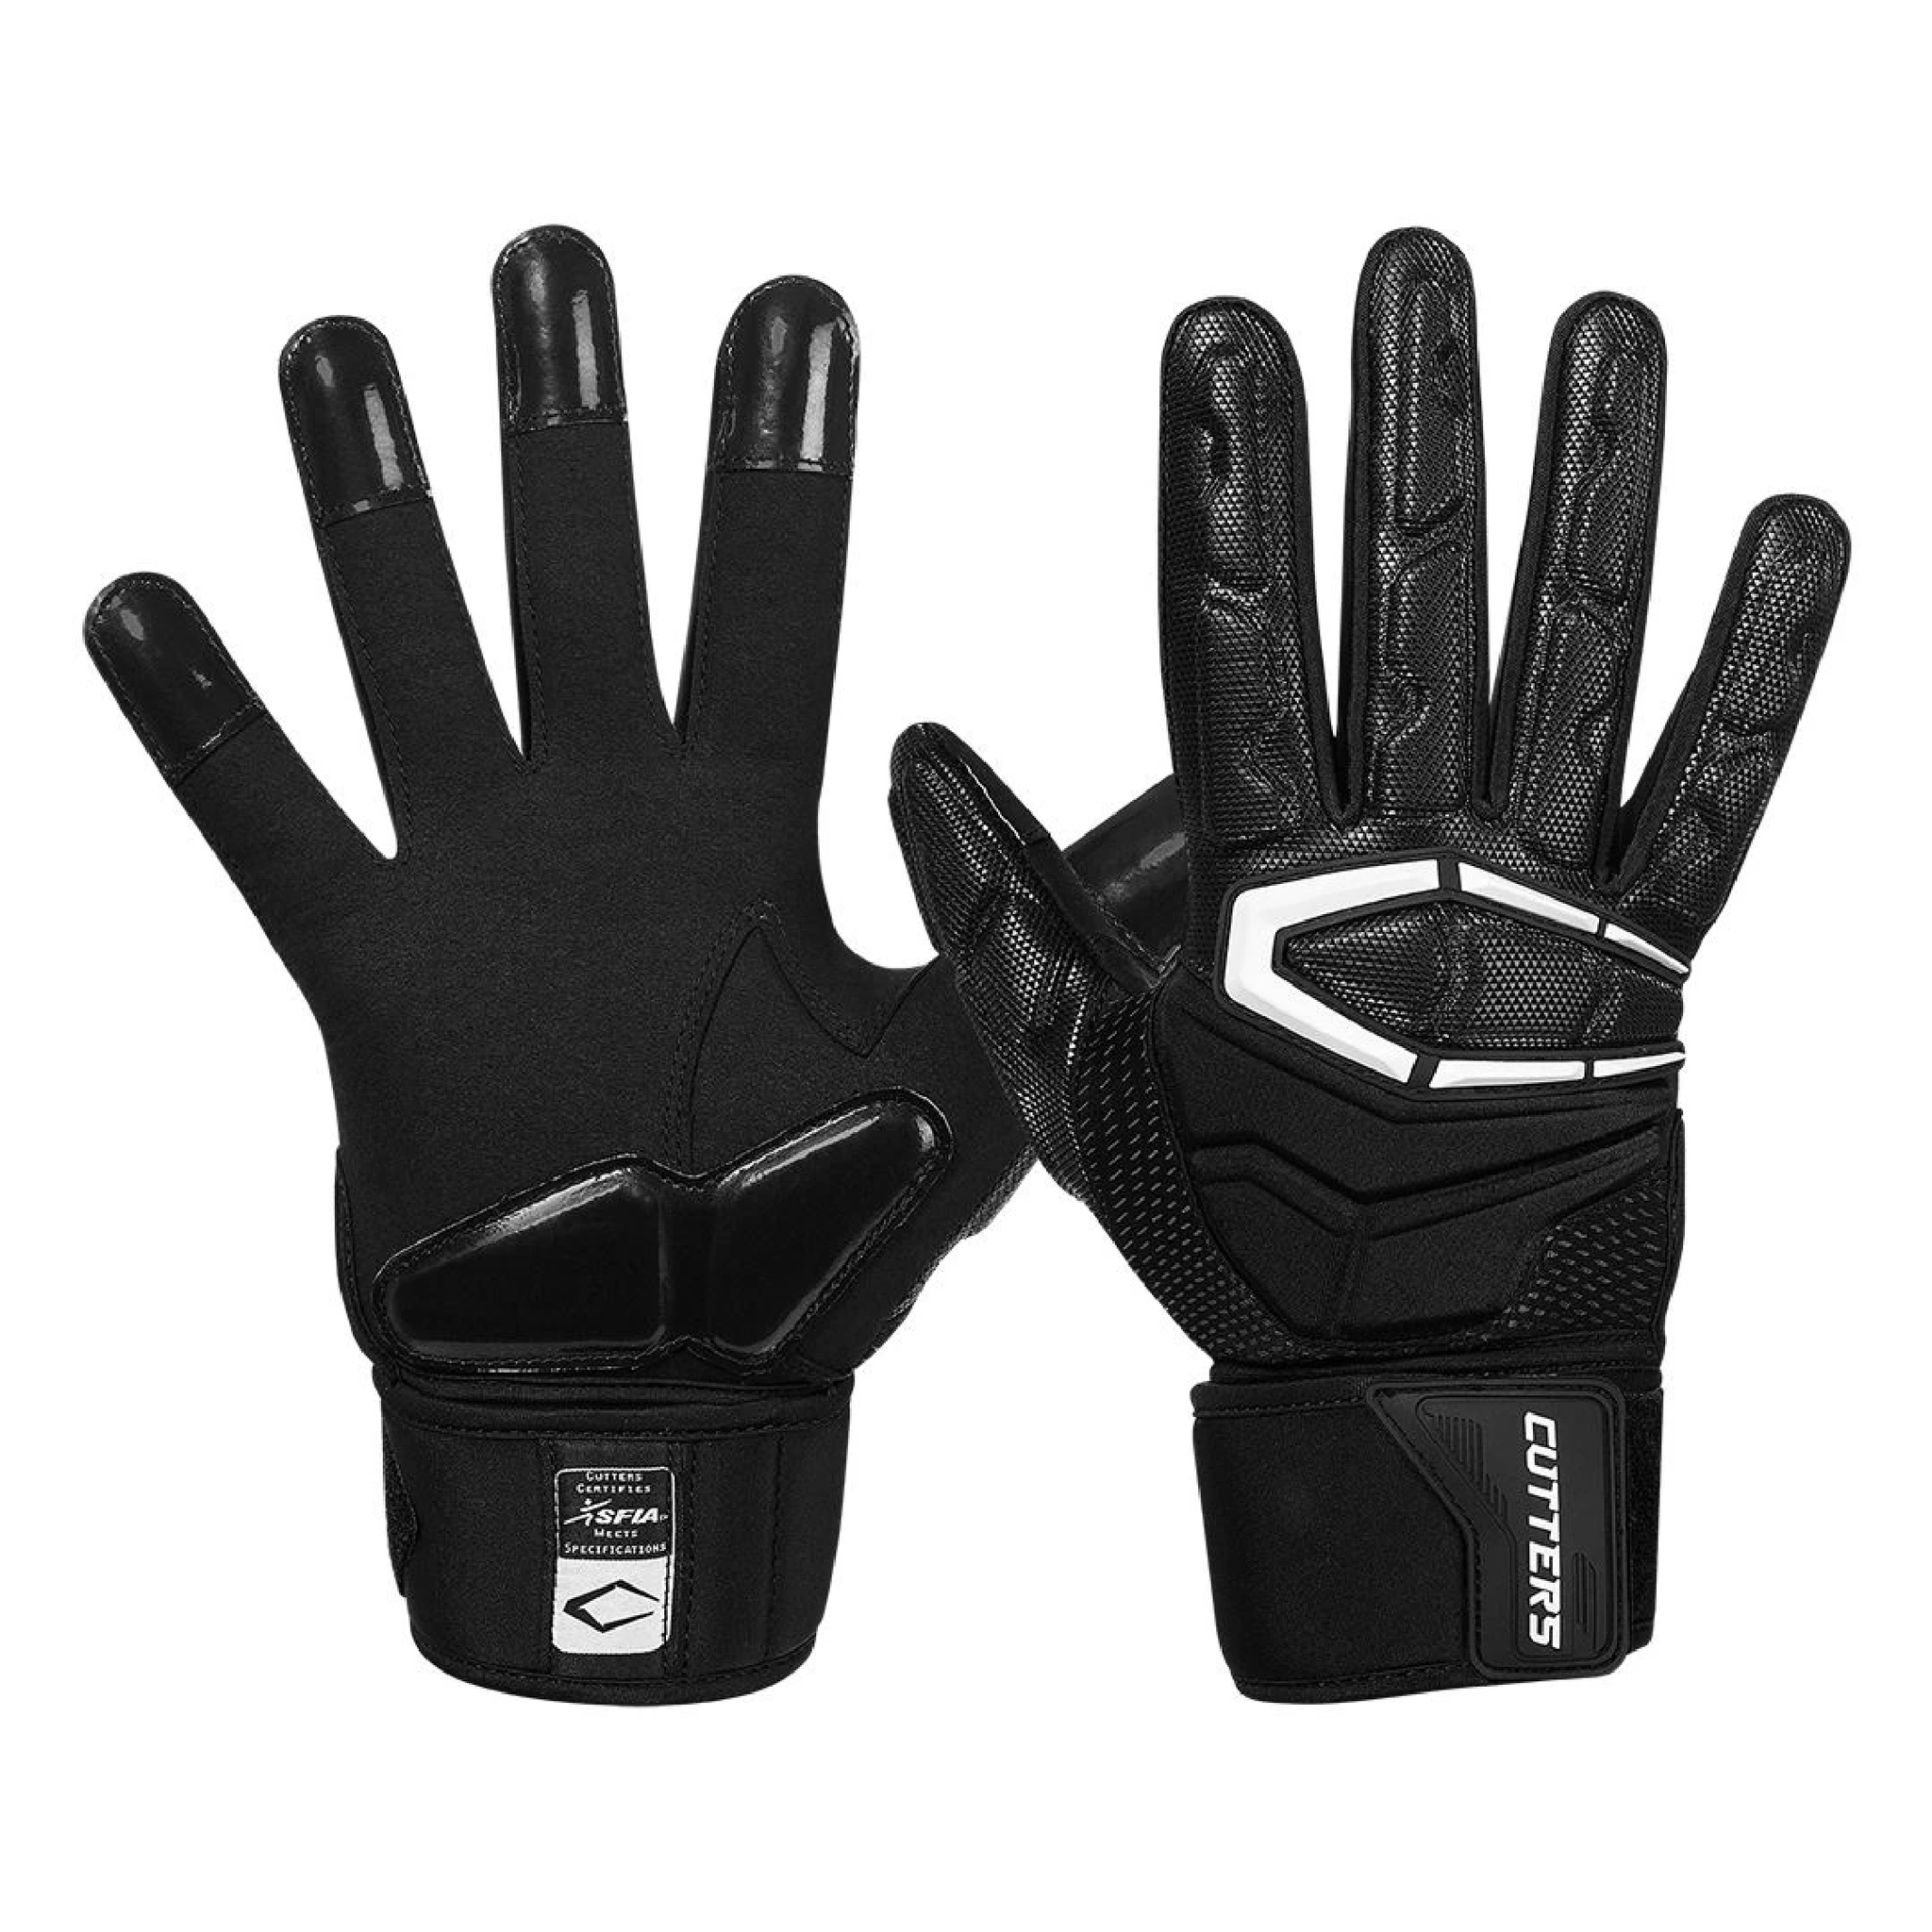 Cutters Force 4.0 Lineman Gloves